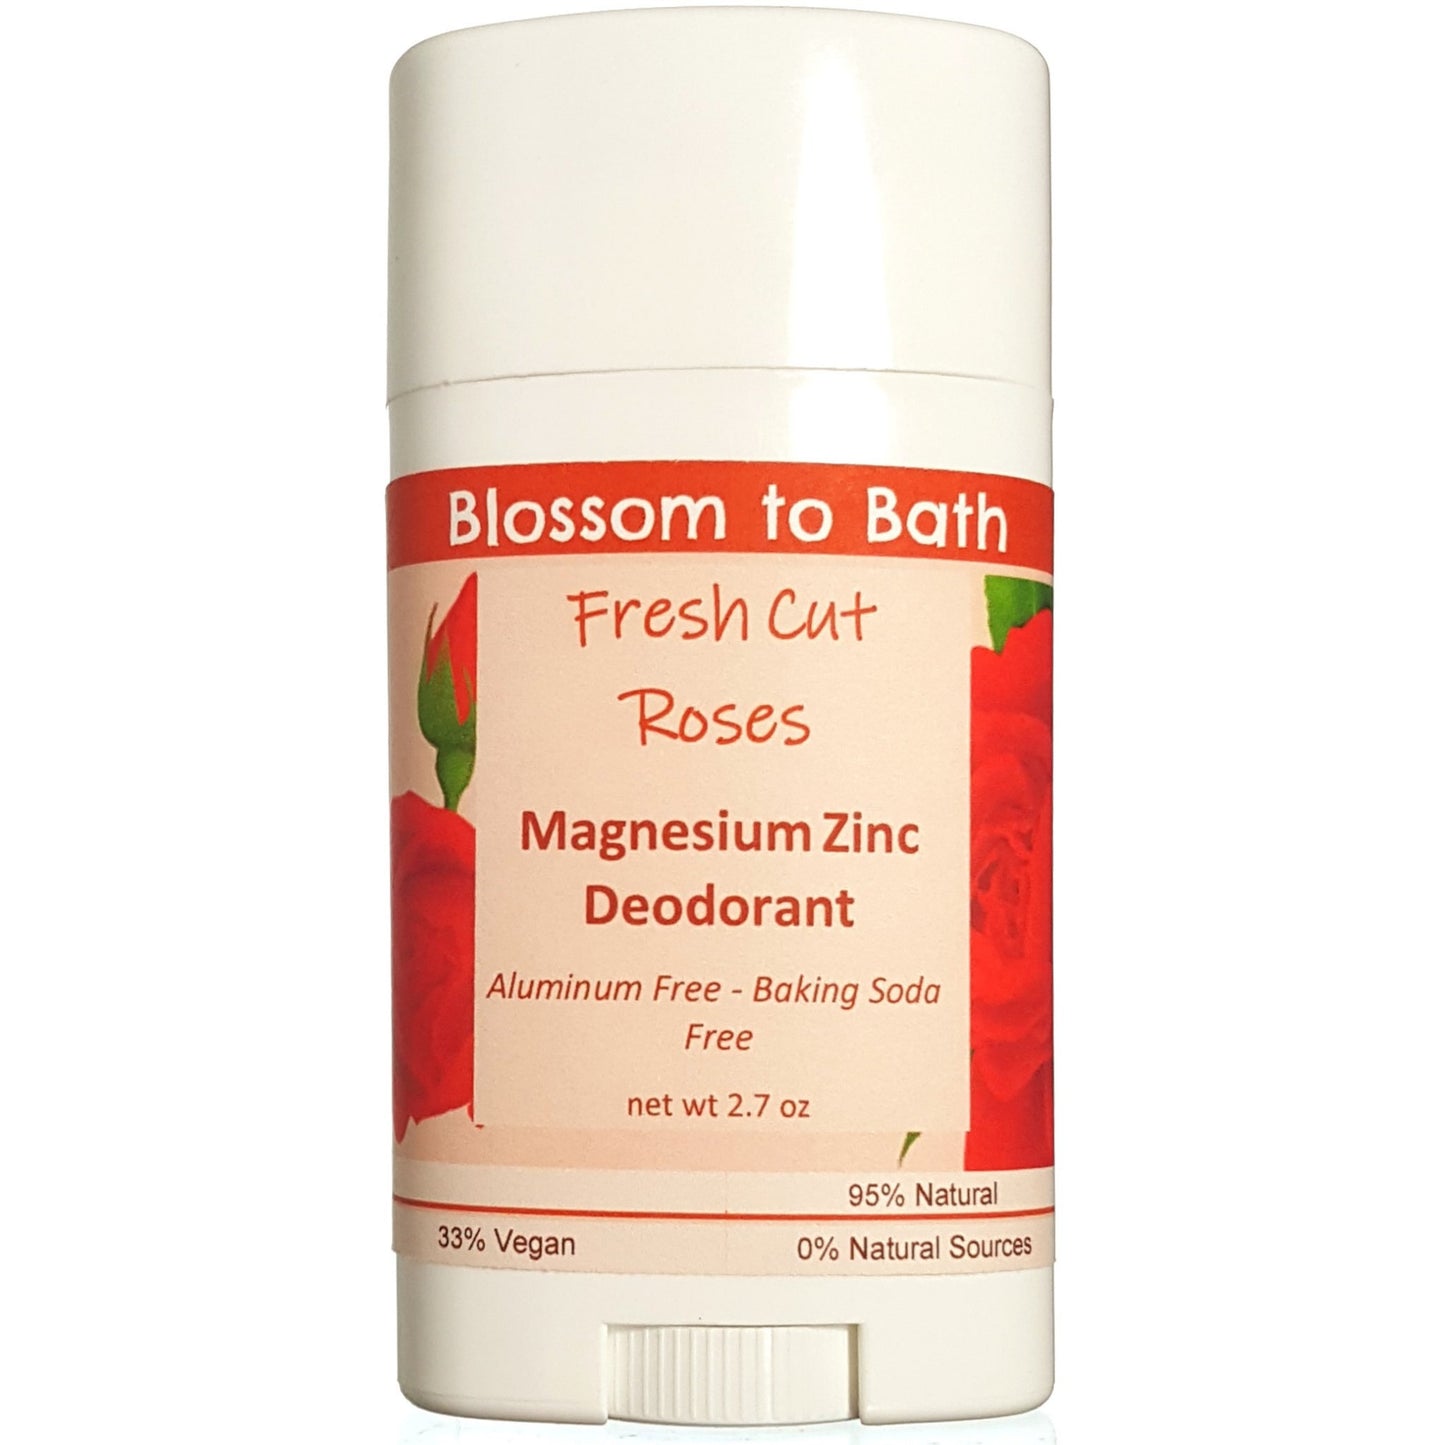 Buy Blossom to Bath Fresh Cut Roses Magnesium Zinc Deodorant from Flowersong Soap Studio.  Long lasting protection made from organic botanicals and butters, made without baking soda, tested in the Arizona heat  A true rose fragrance, the scent captures the splendor of a newly blossomed rose.